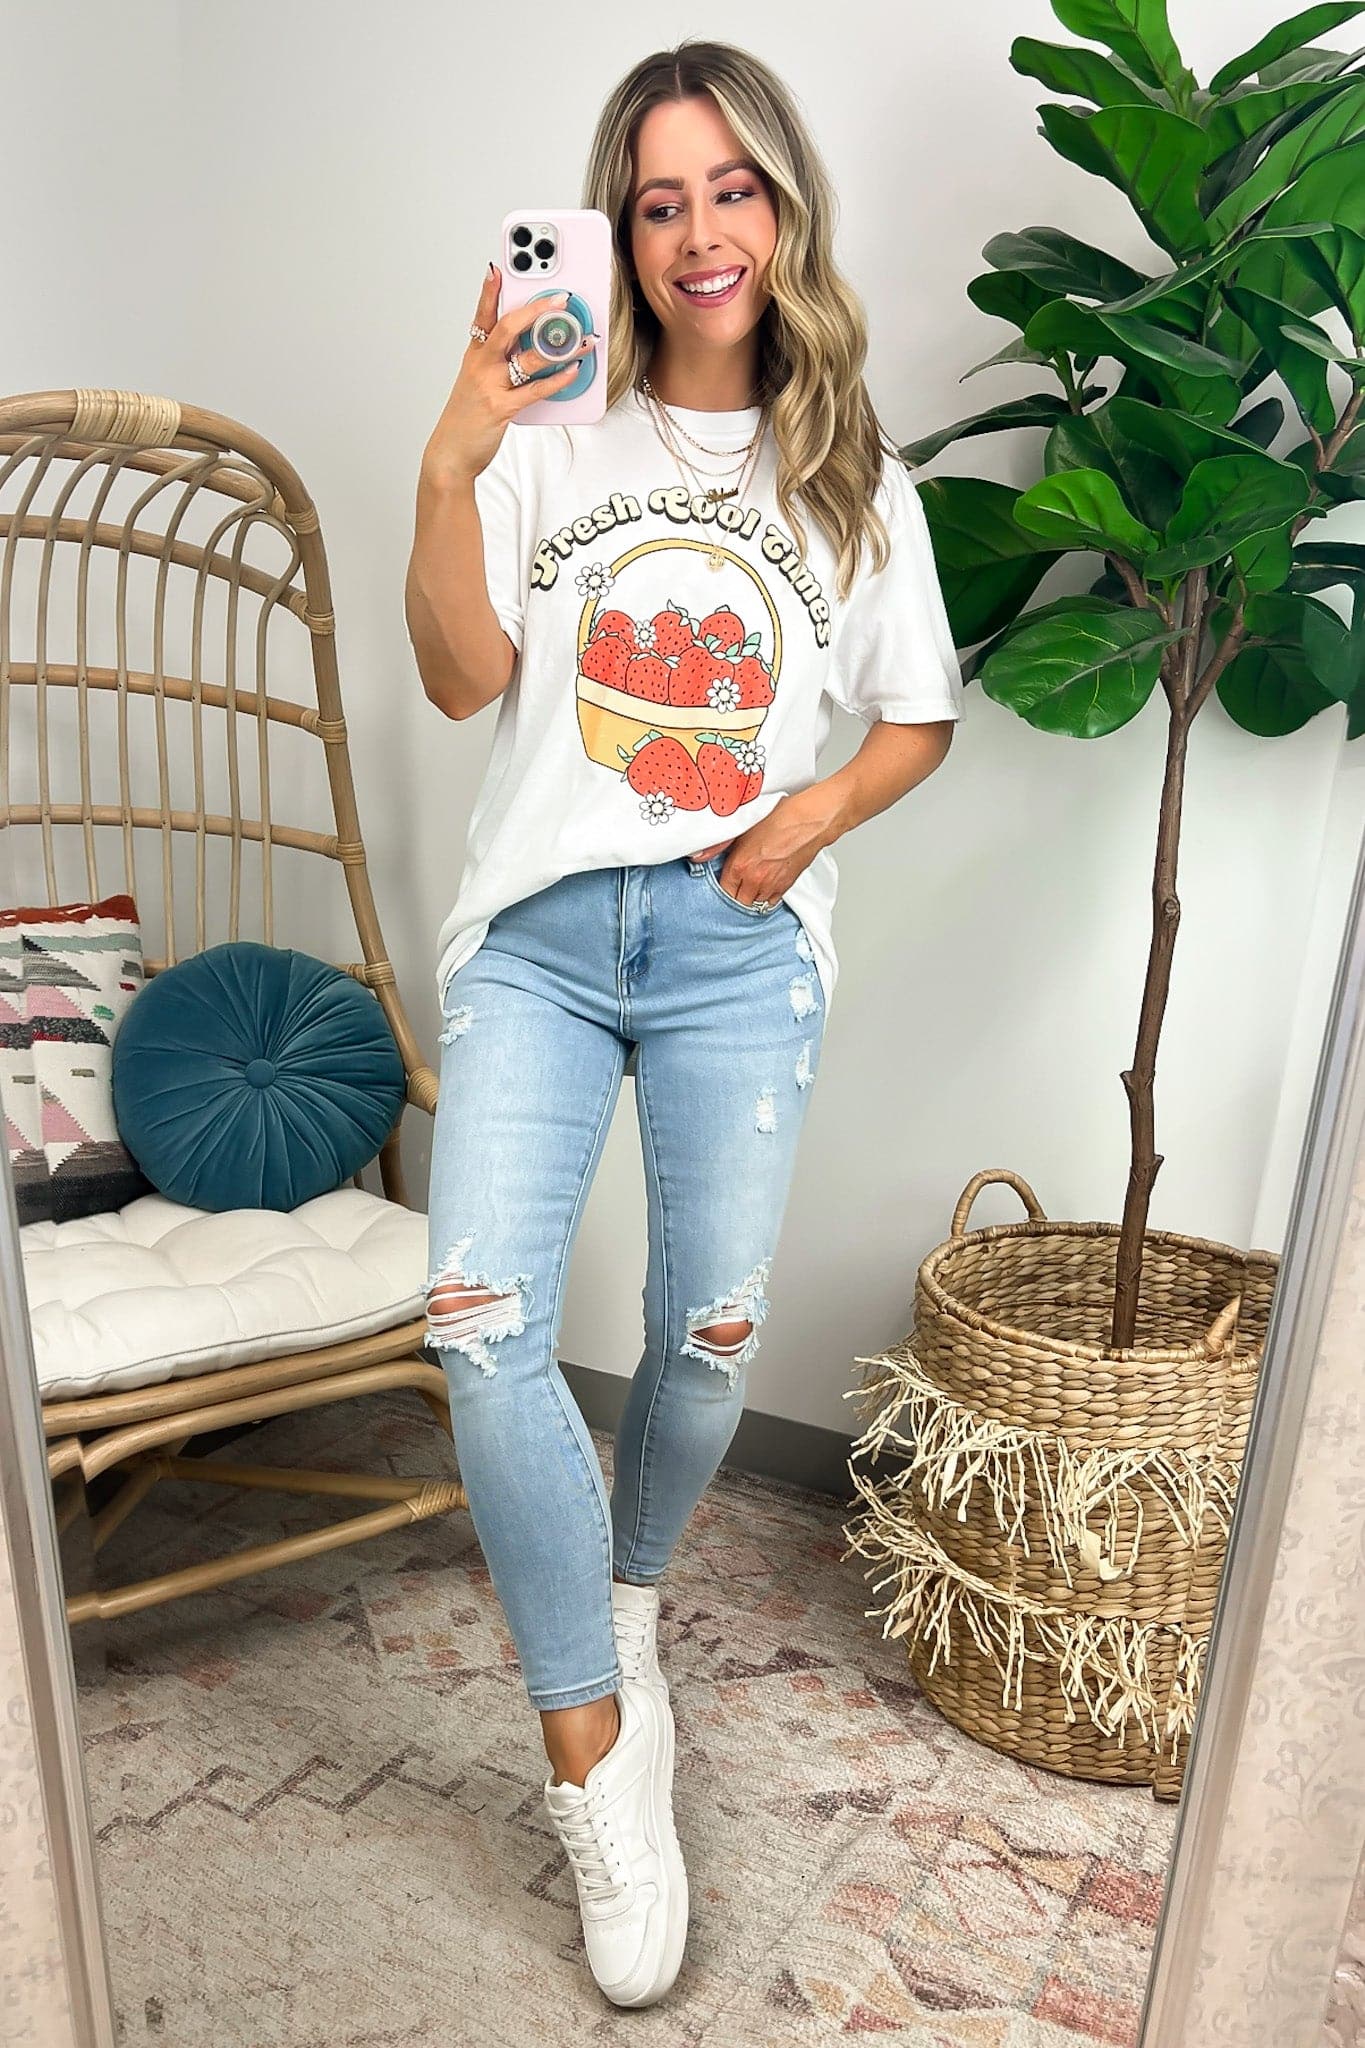  Fresh Cool Times Strawberry Vintage Graphic Tee - FINAL SALE - Madison and Mallory